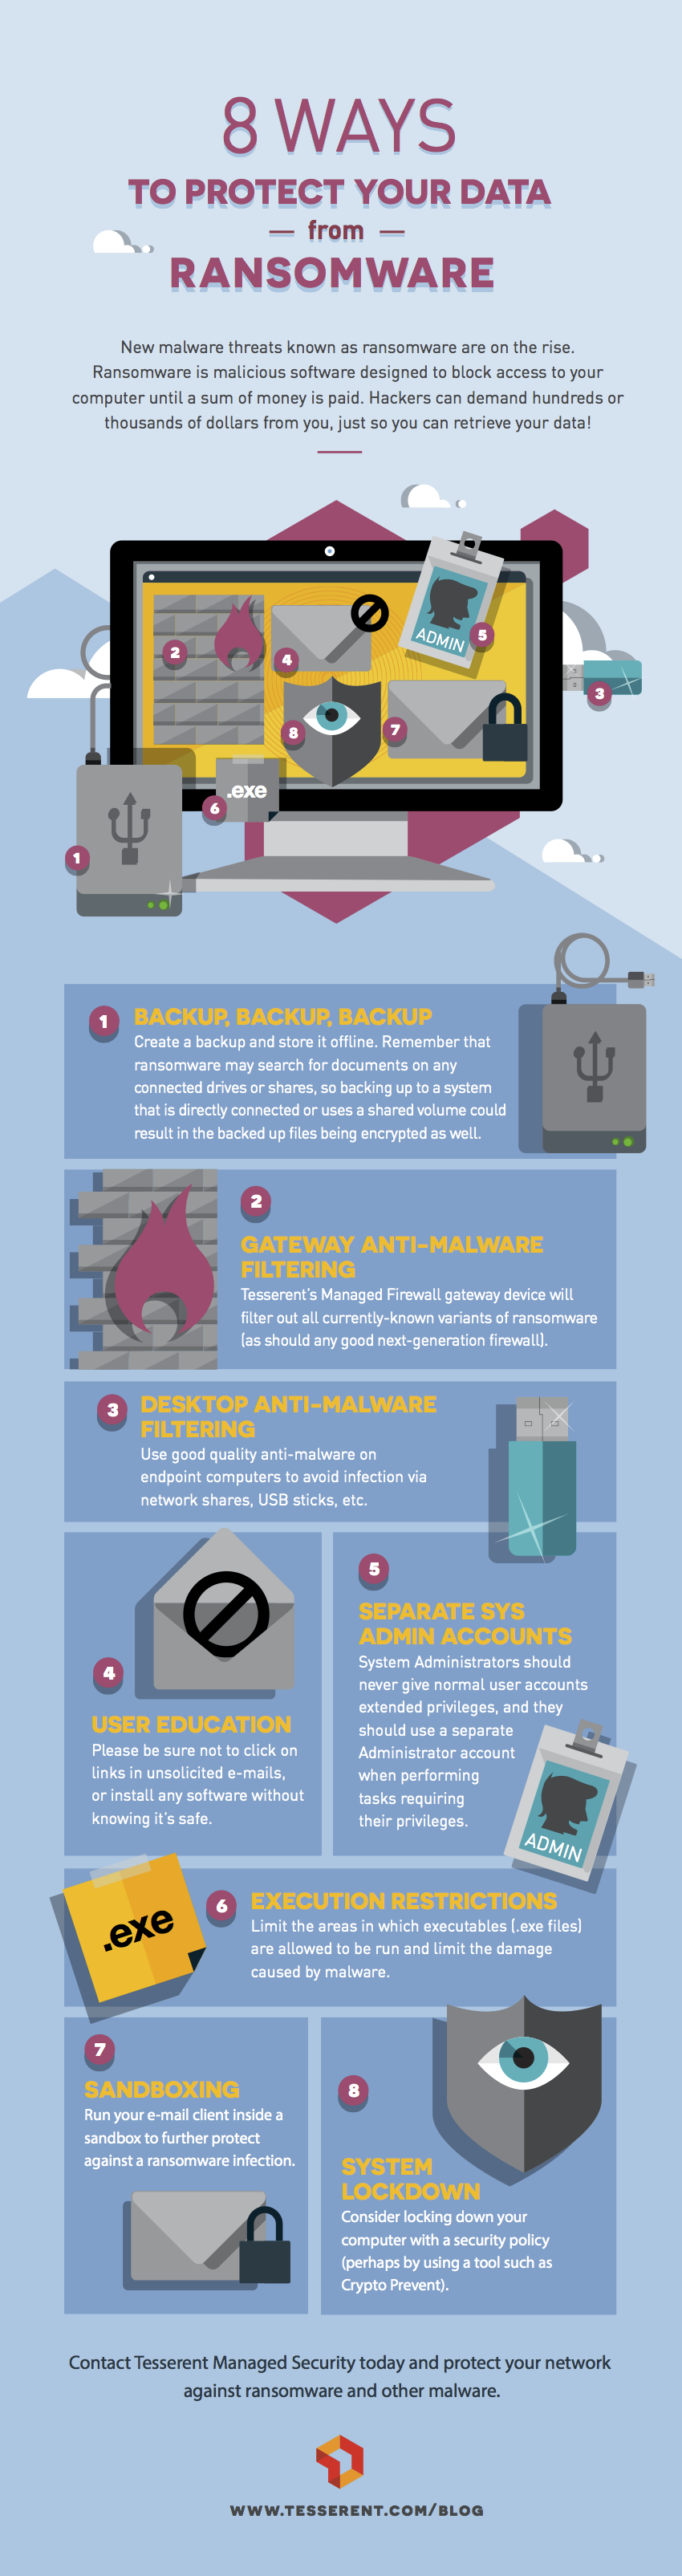 Tesserent-Ransomware-Infographic